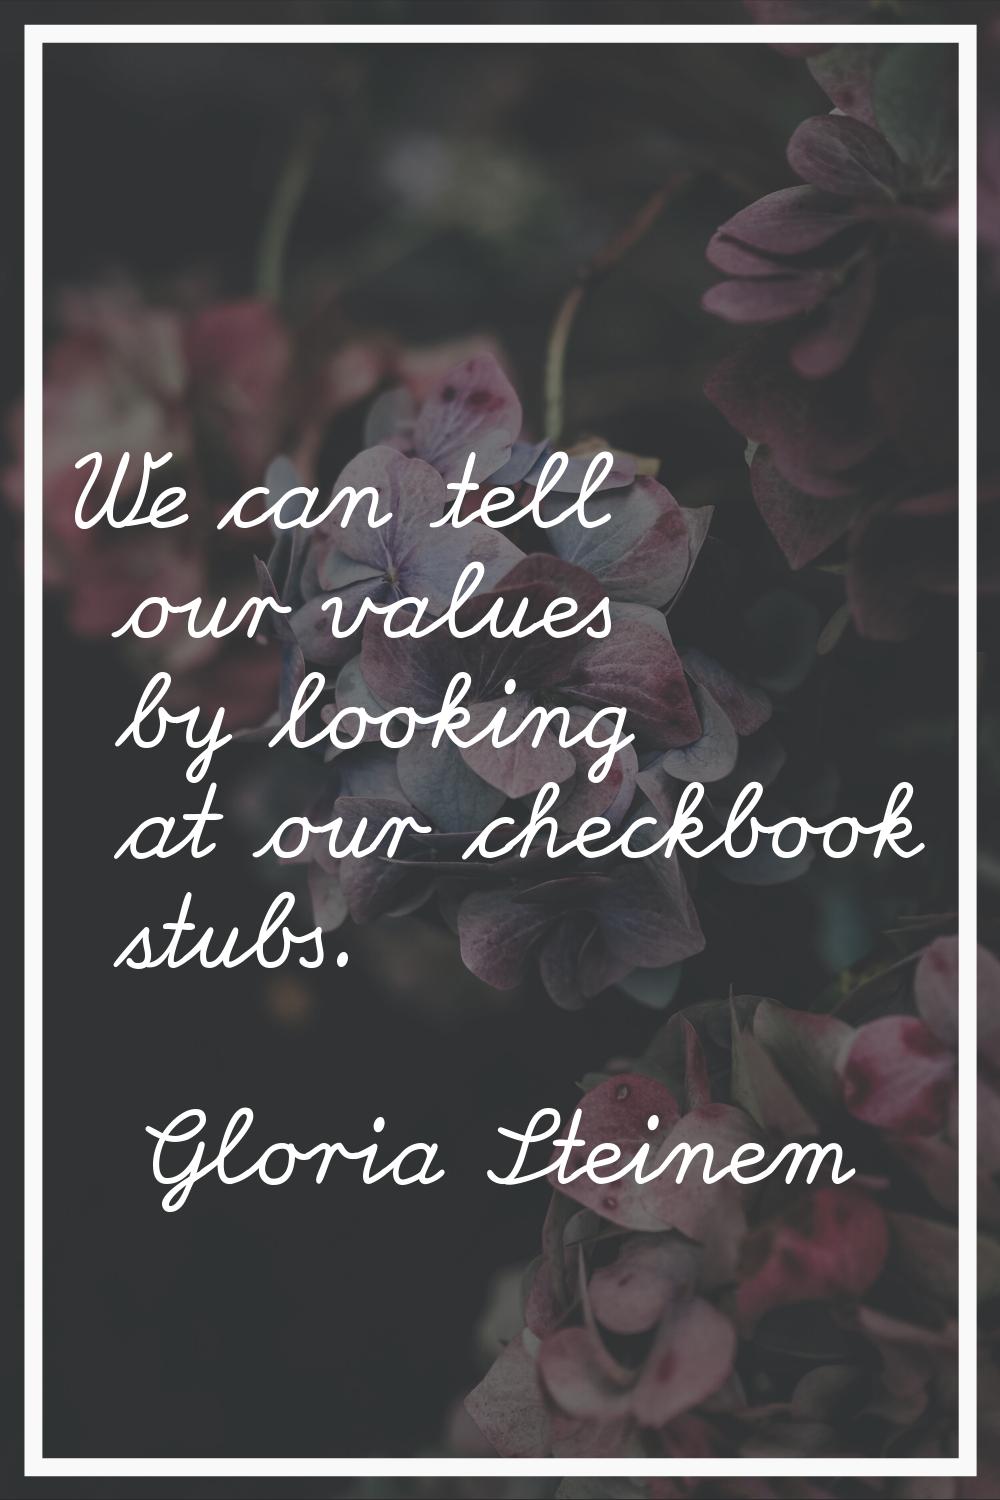 We can tell our values by looking at our checkbook stubs.